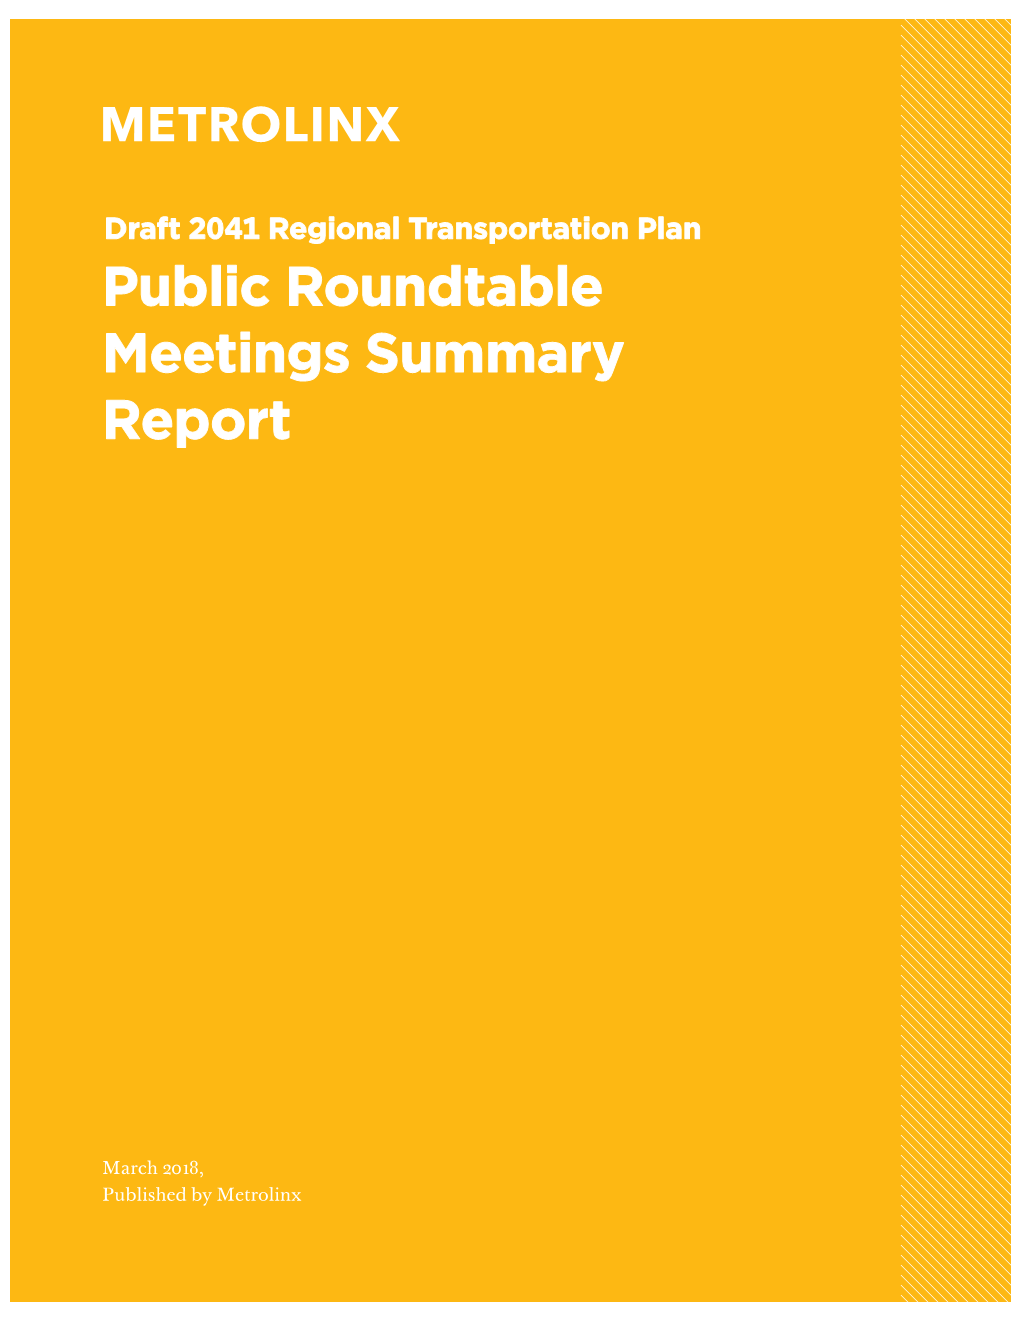 Public Roundtable Meetings Summary Report